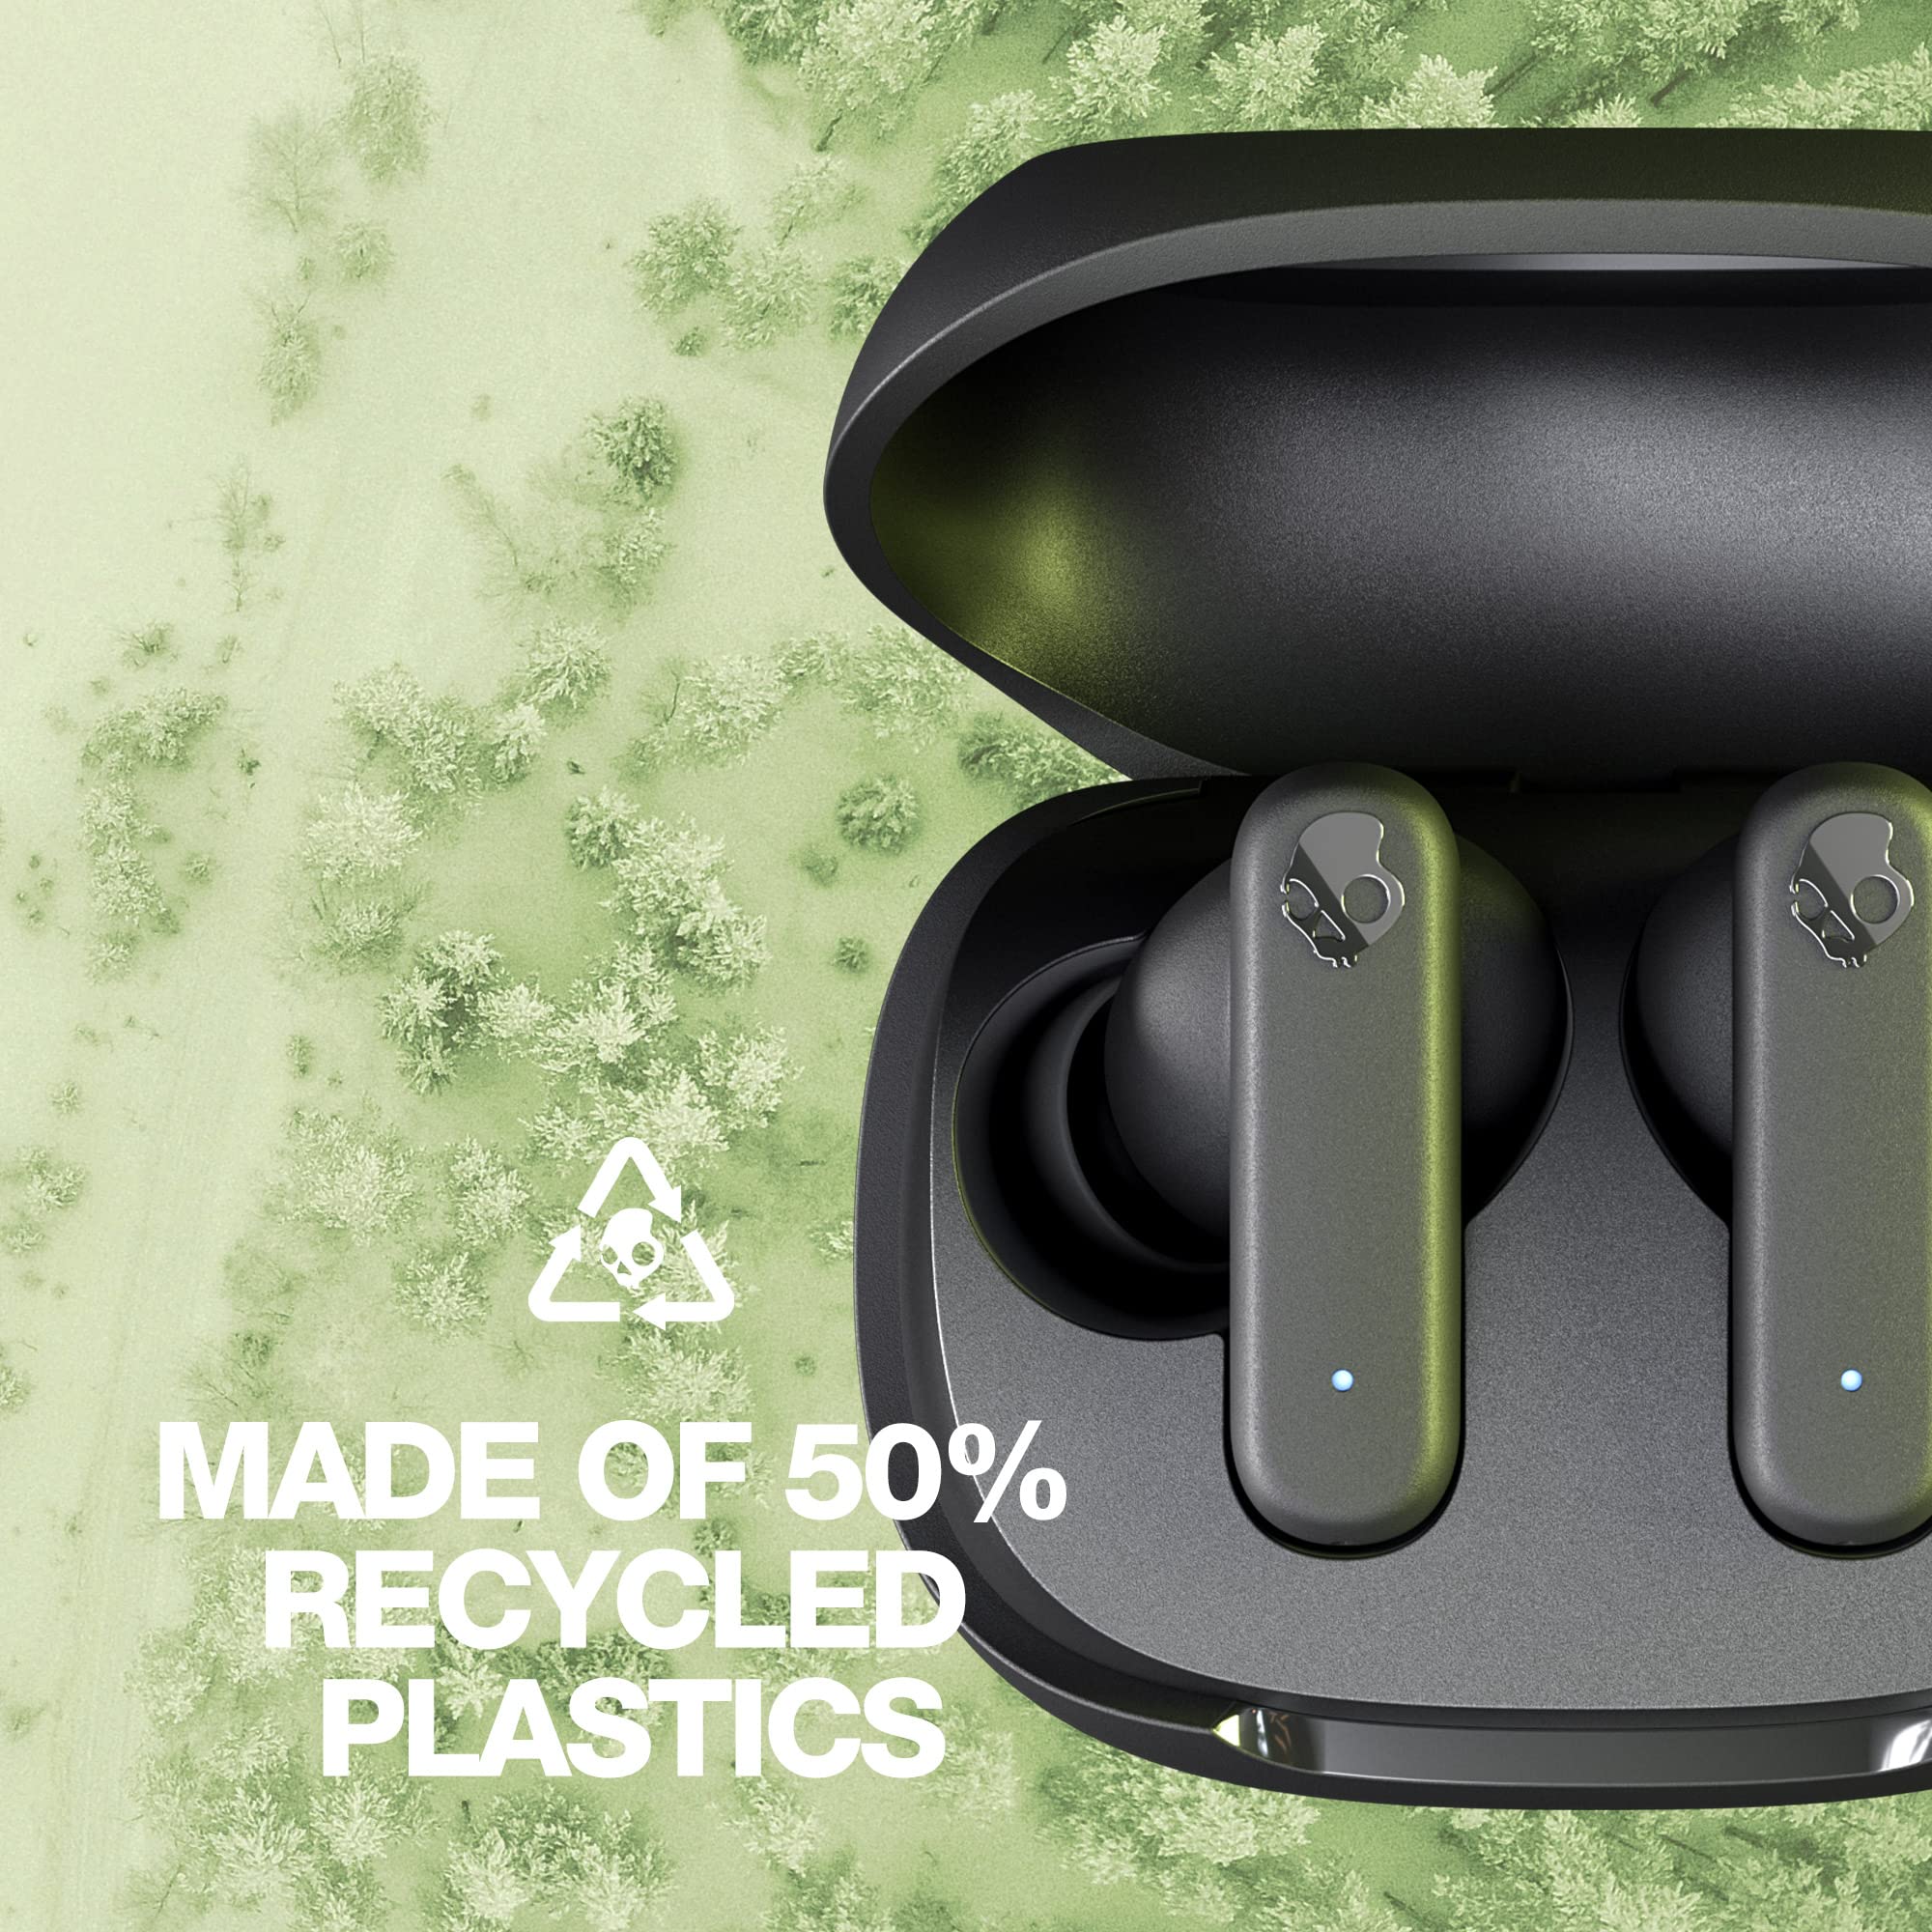 Skullcandy Smokin Bud In-Ear Wireless Earbuds, 20 Hr Battery, 50% Renewable Plastics, Microphone, Works with iPhone Android and Bluetooth Devices - Black